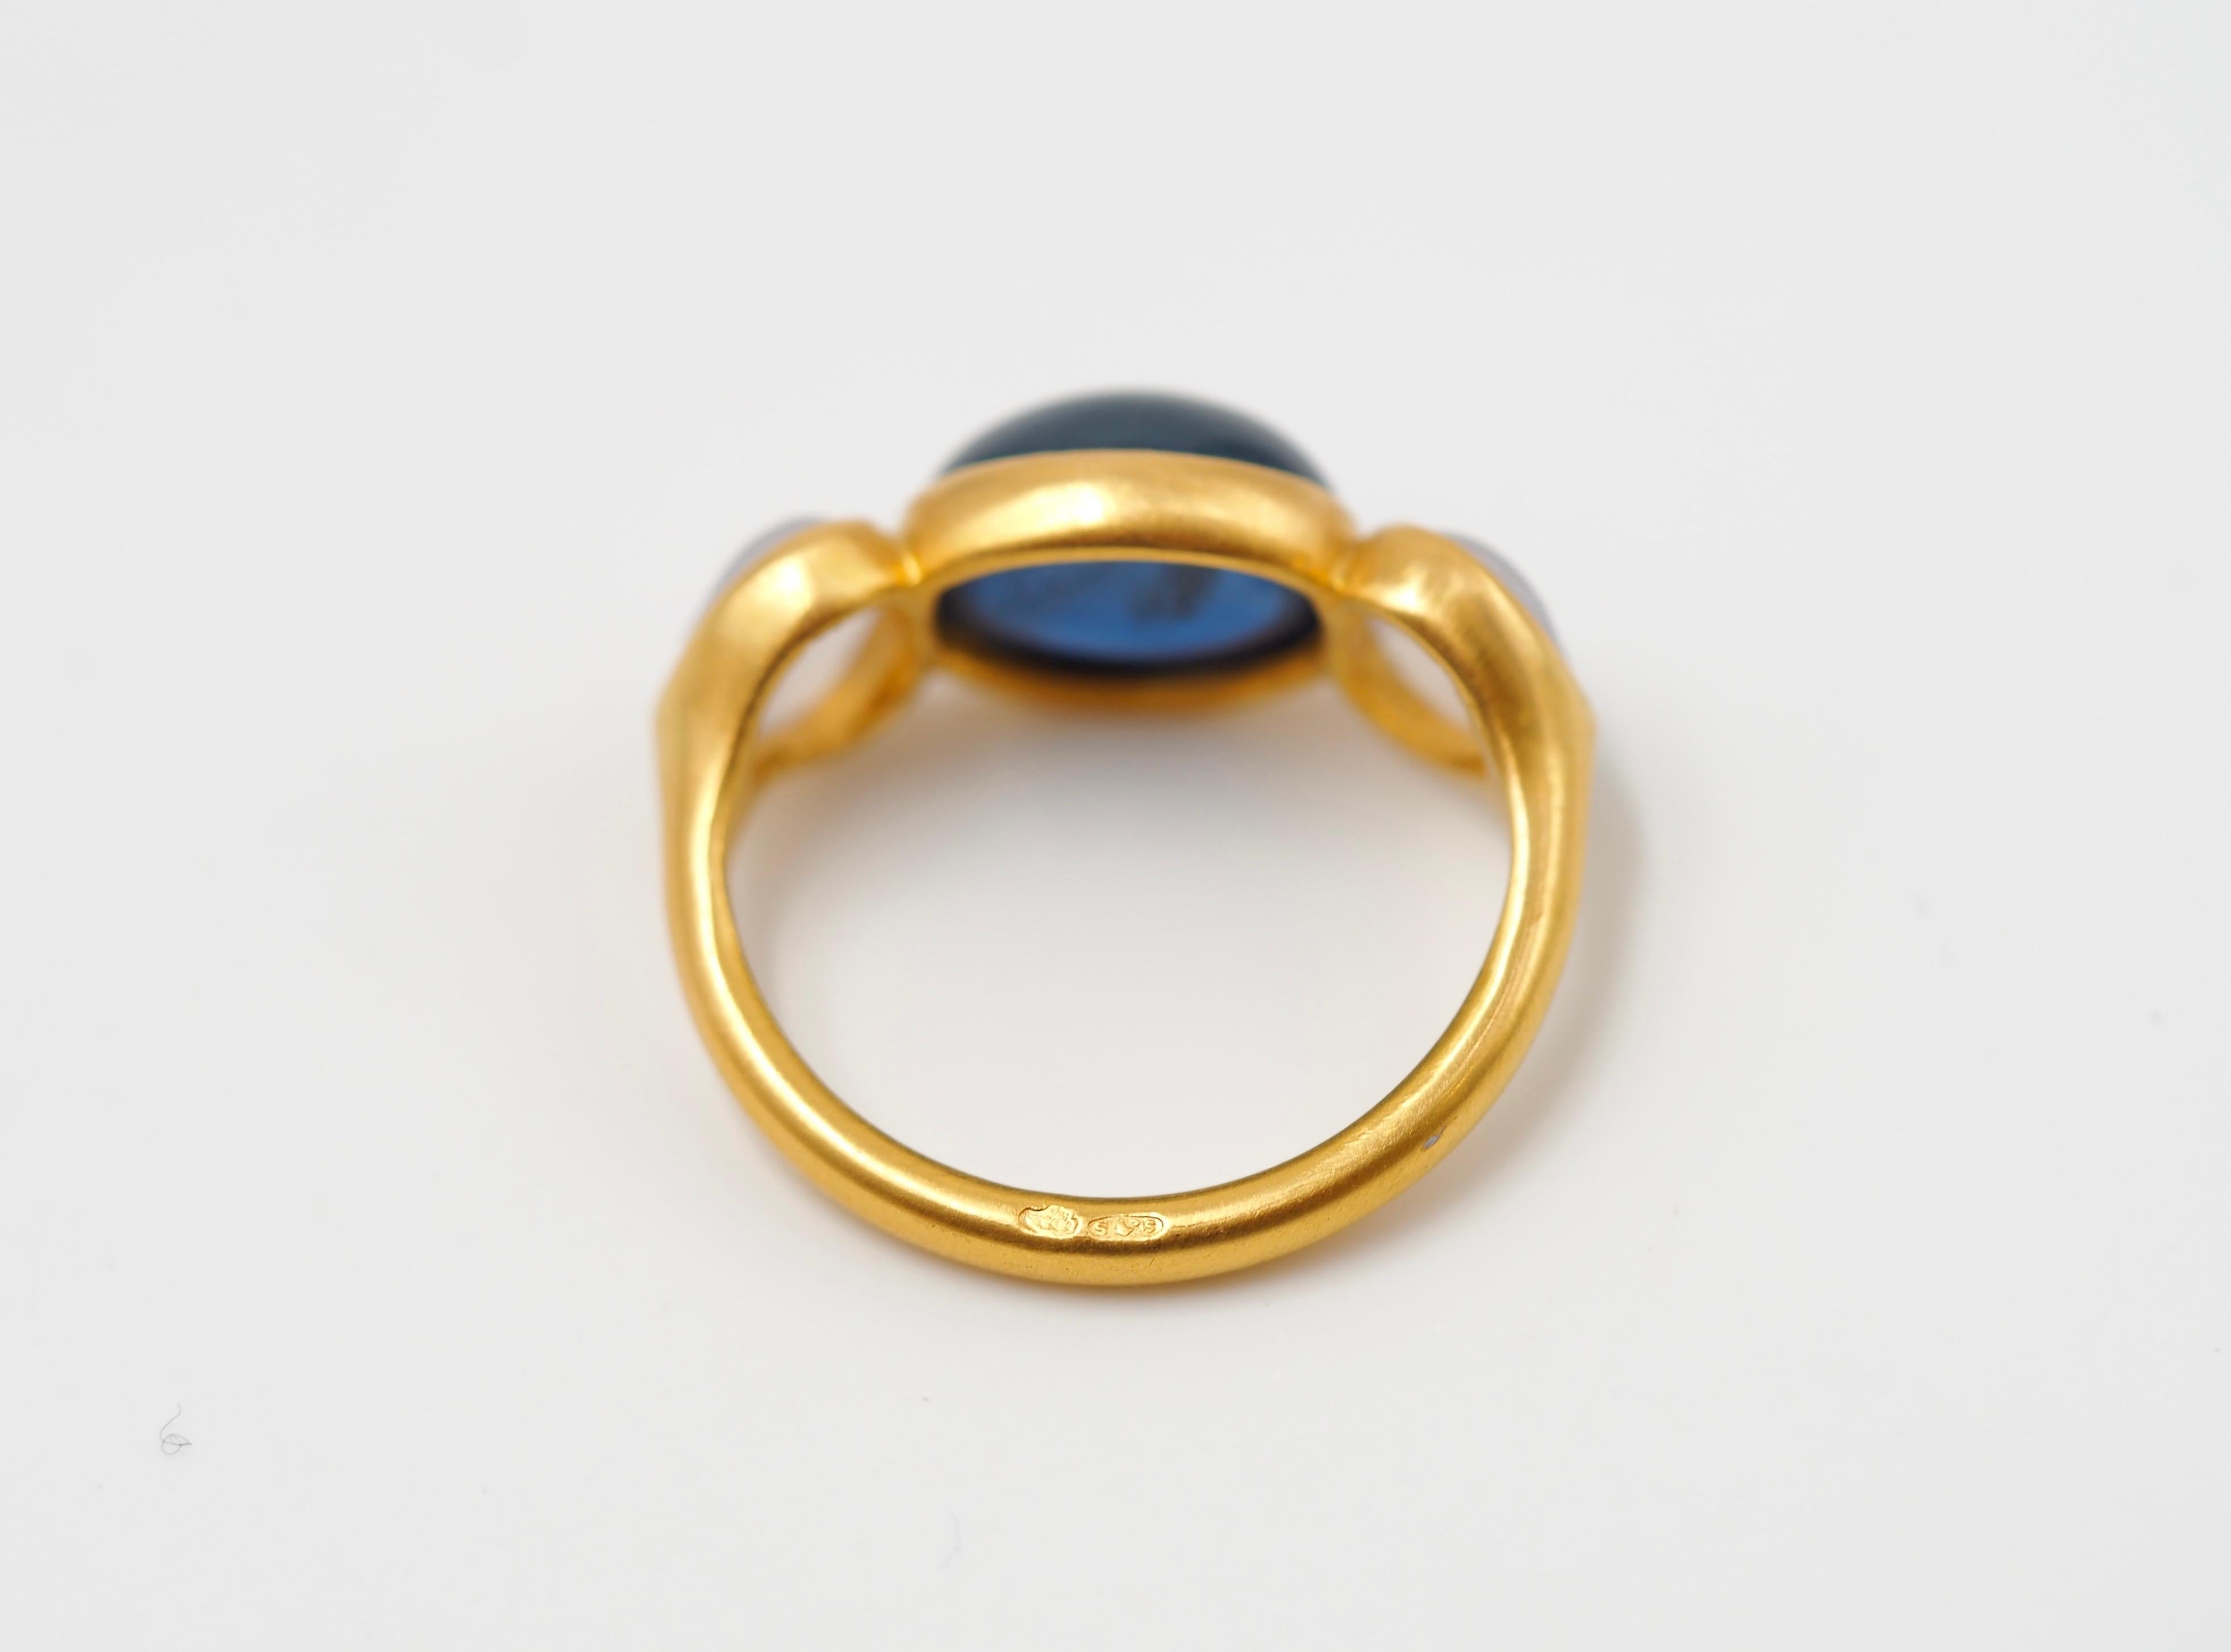 Scrives 7.58 carat Blue Sapphire Cabochon White Chalcedony 22 Karat Gold Ring For Sale 5